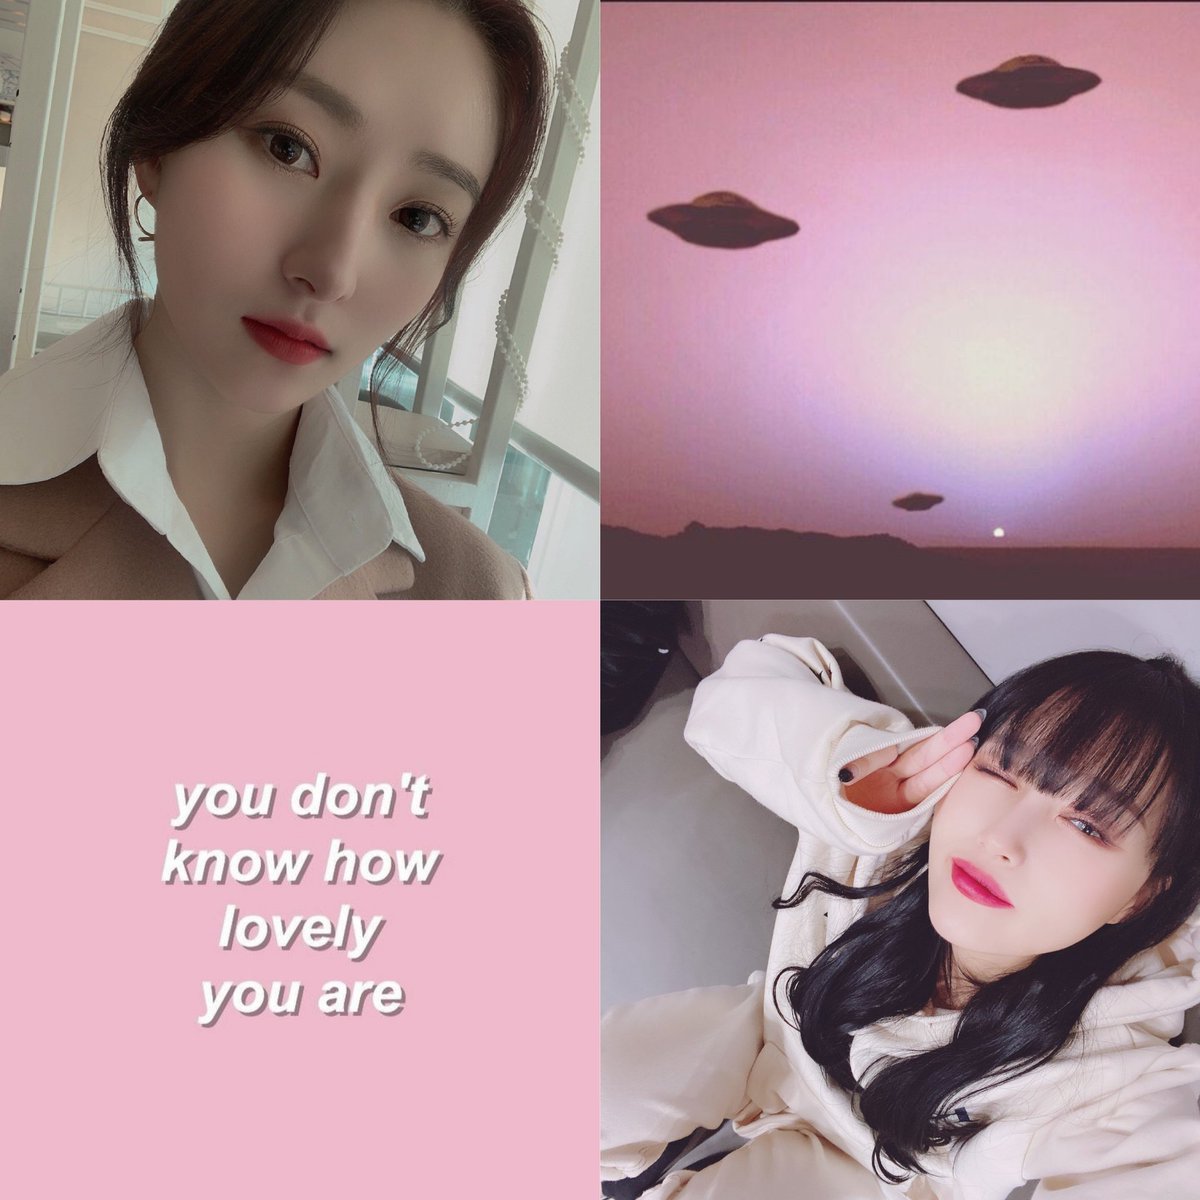 "who took my hand and brought me here?"siyeon isn't supposed to talk to humans on earth and definitely not to fall in love with them. but she meets bora and breaks all the rules, going as far as abducting her. back on her home planet, siyeon has to face the consequences...